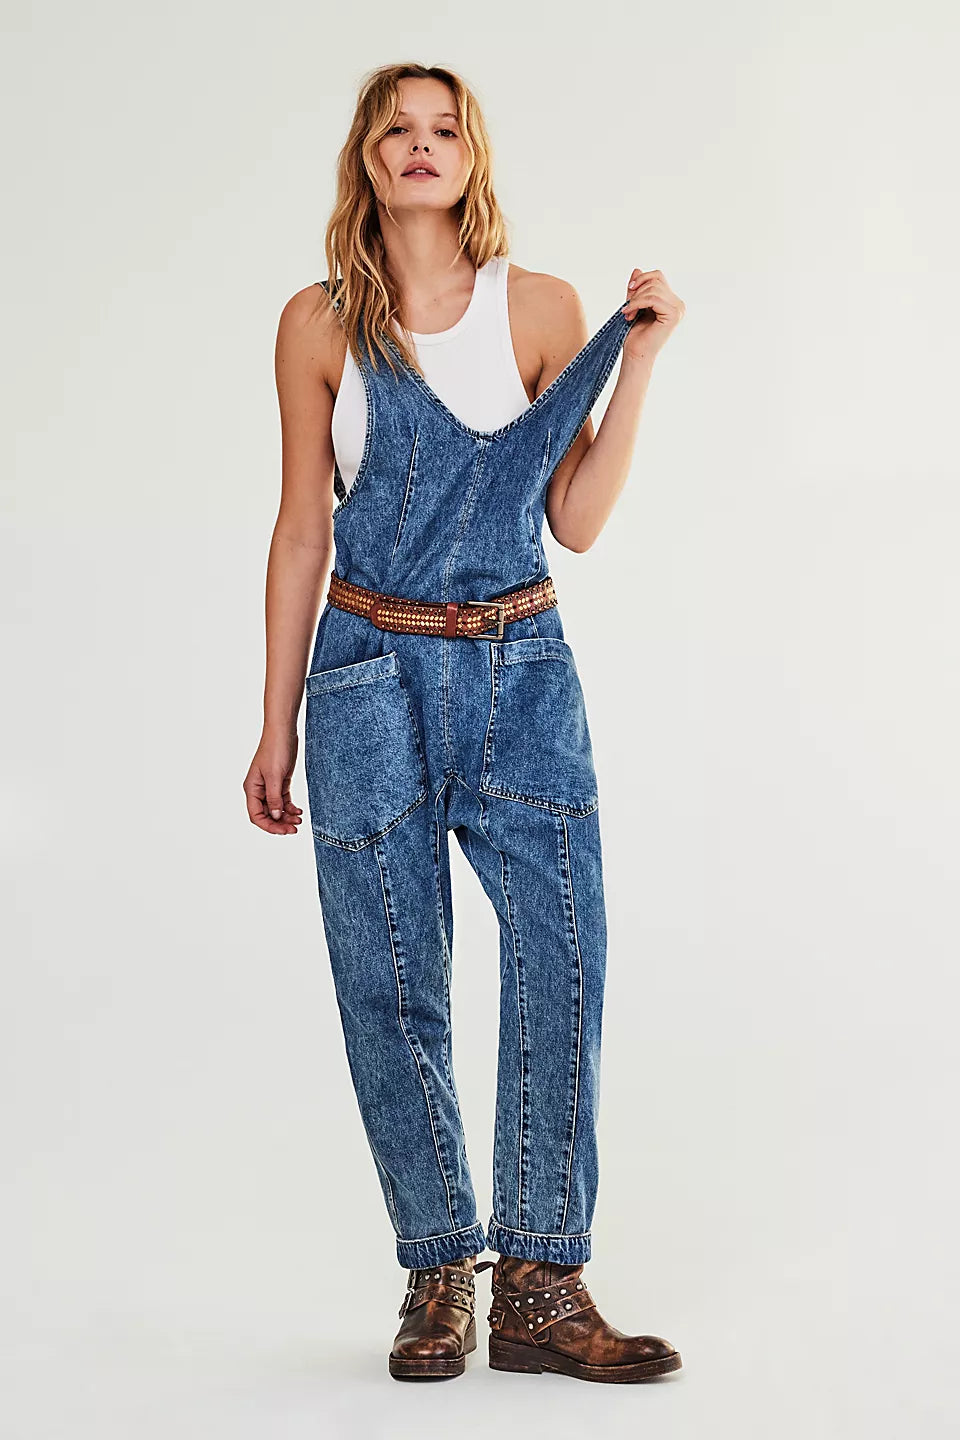 FREE PEOPLE-"HIGH ROLLER"JUMPSUIT